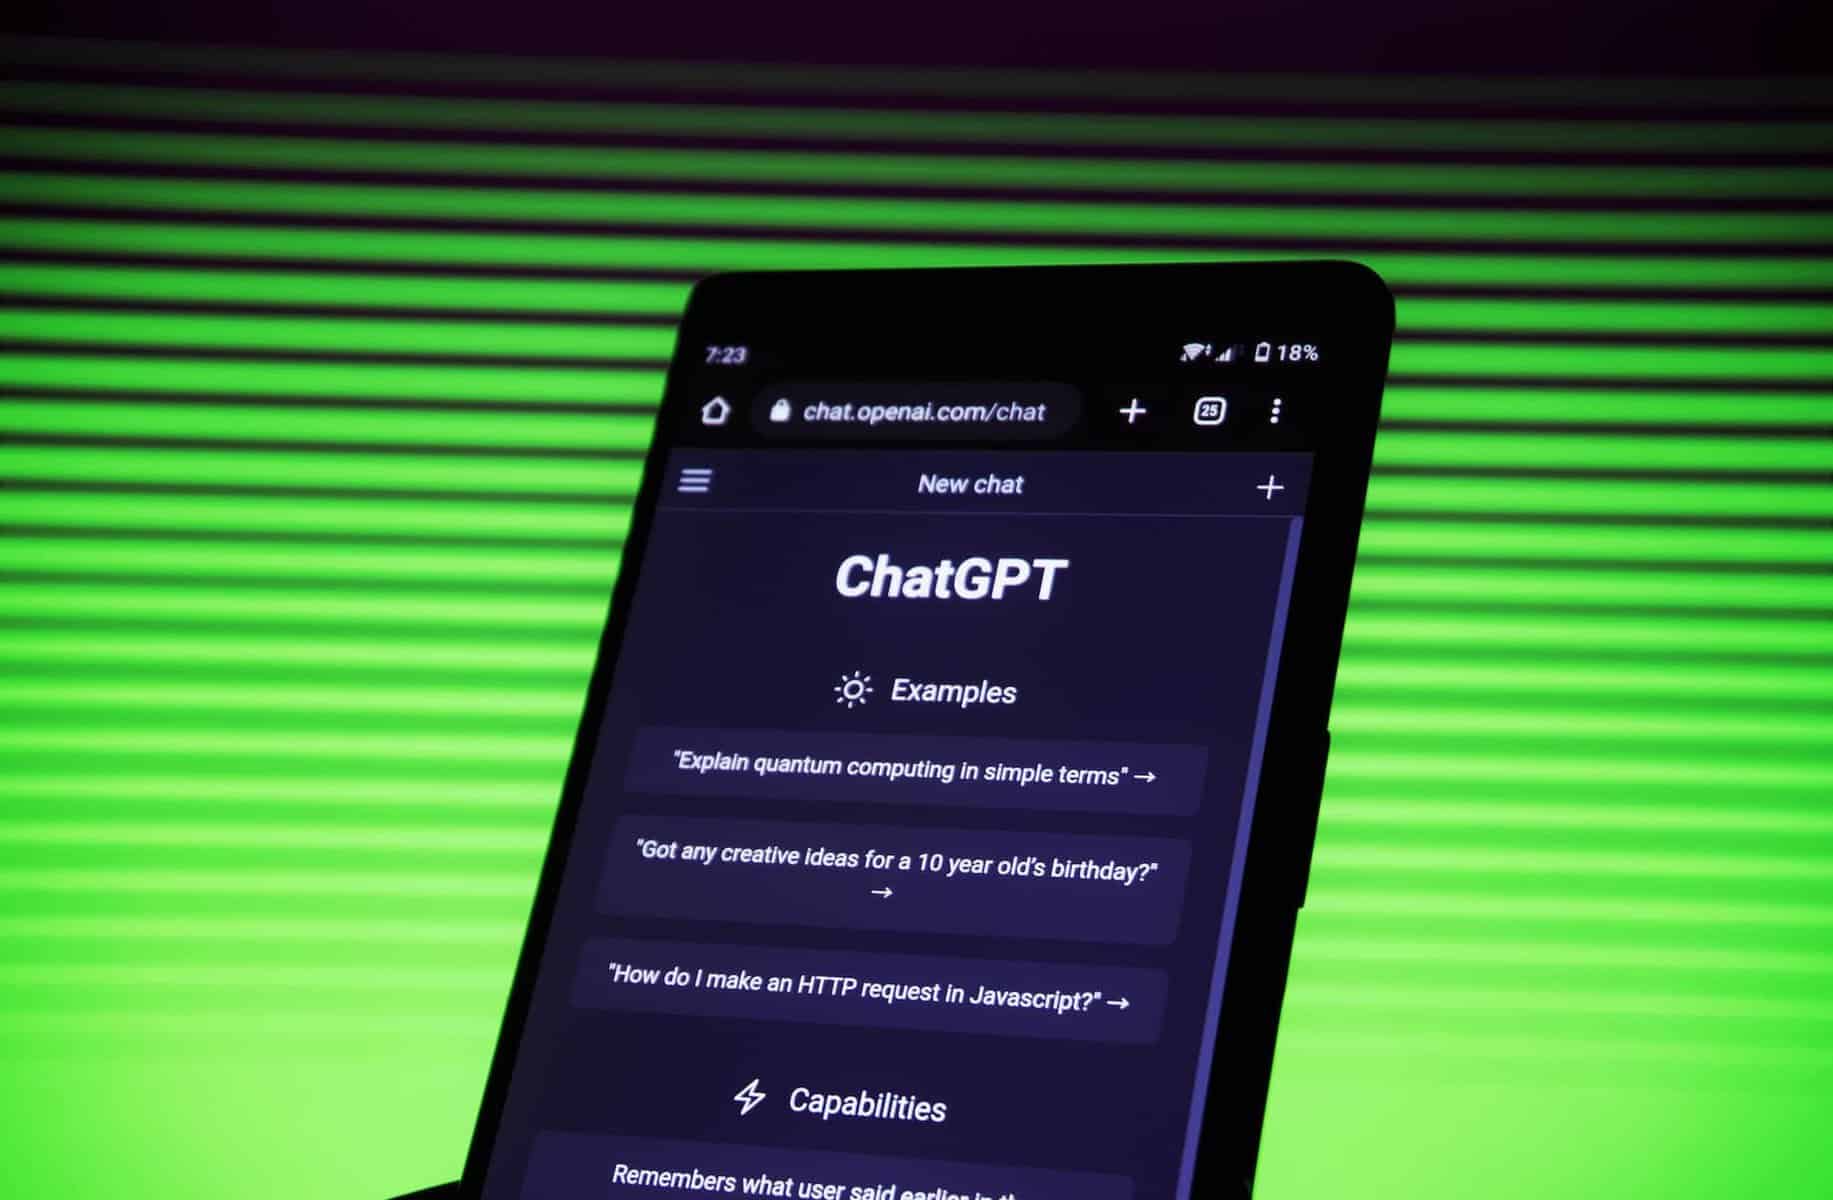 Is there an official ChatGPT mobile app?